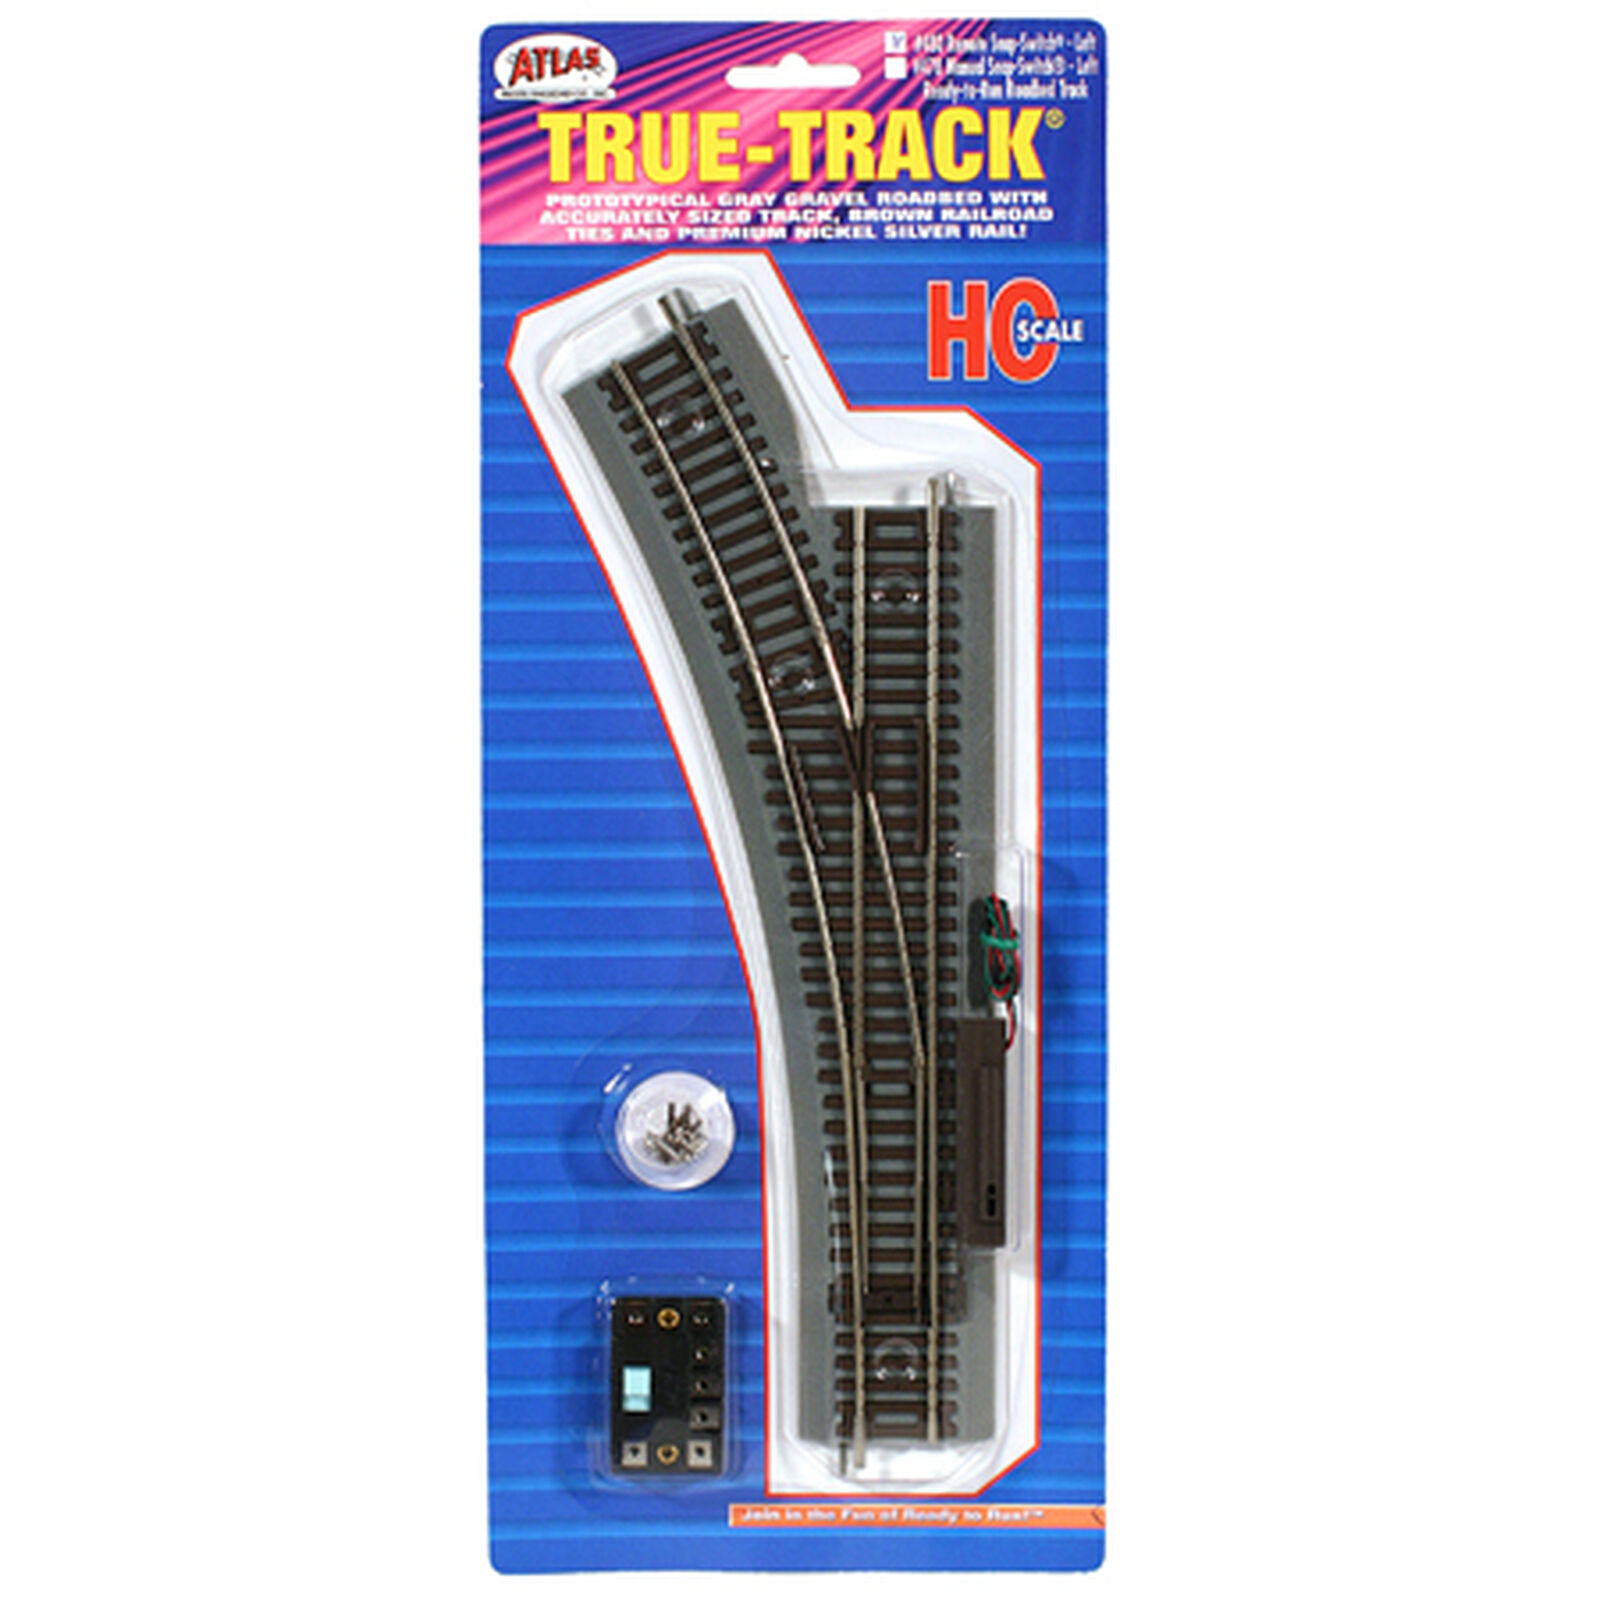 HO True-Track Remote Left-Hand Switch